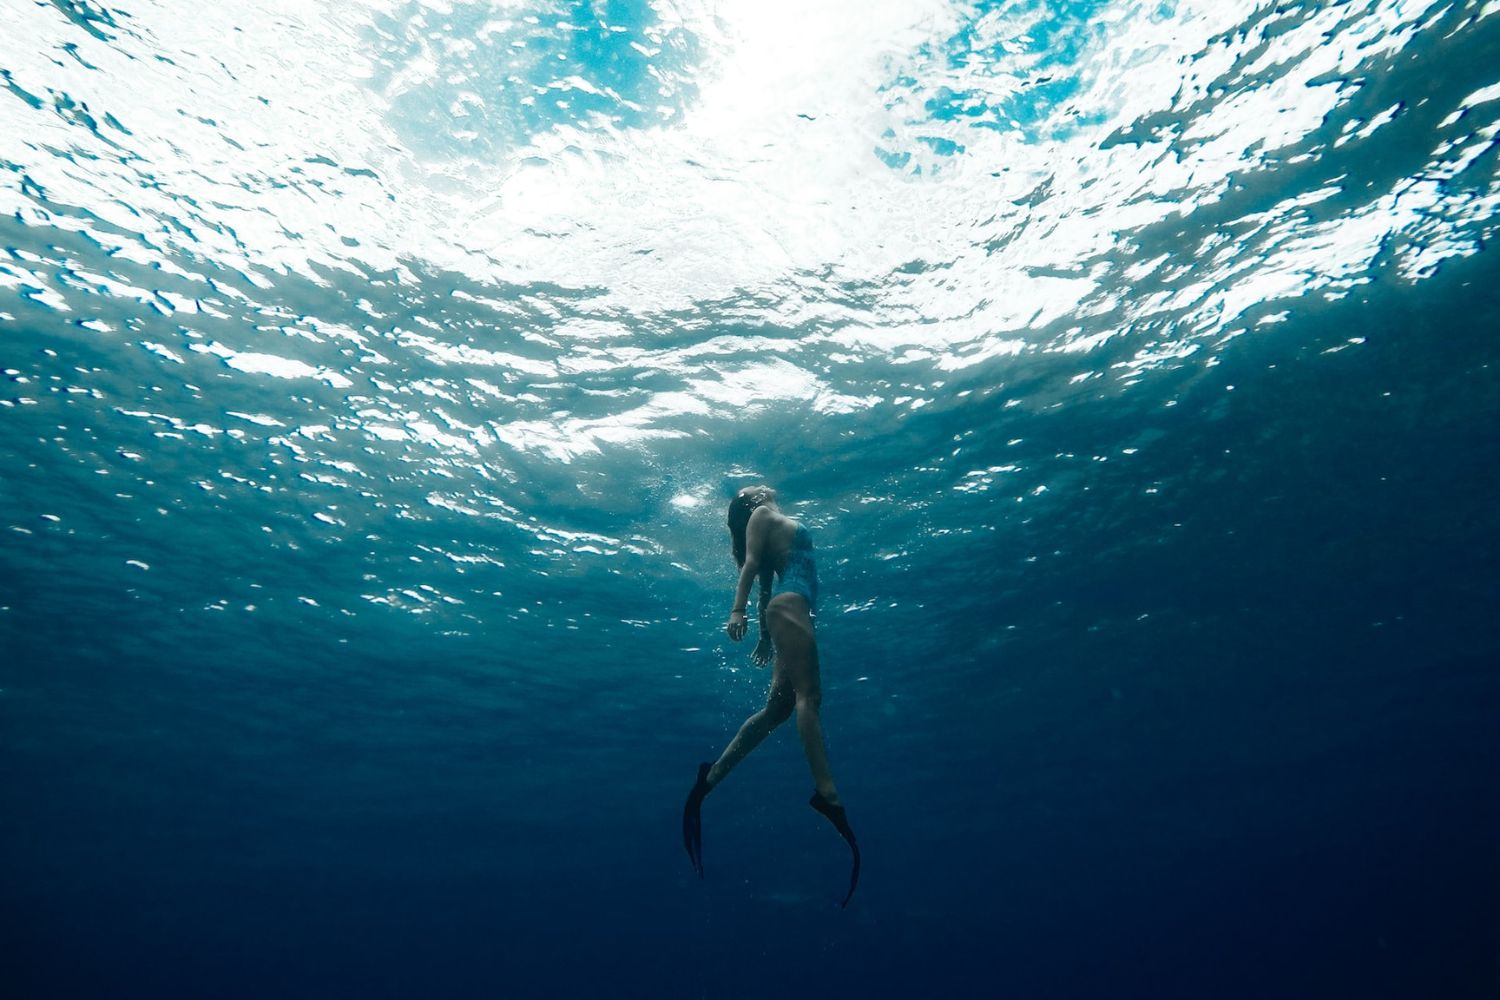 mermaid standing in the sea Photo by Jeremy Bishop on Unsplash